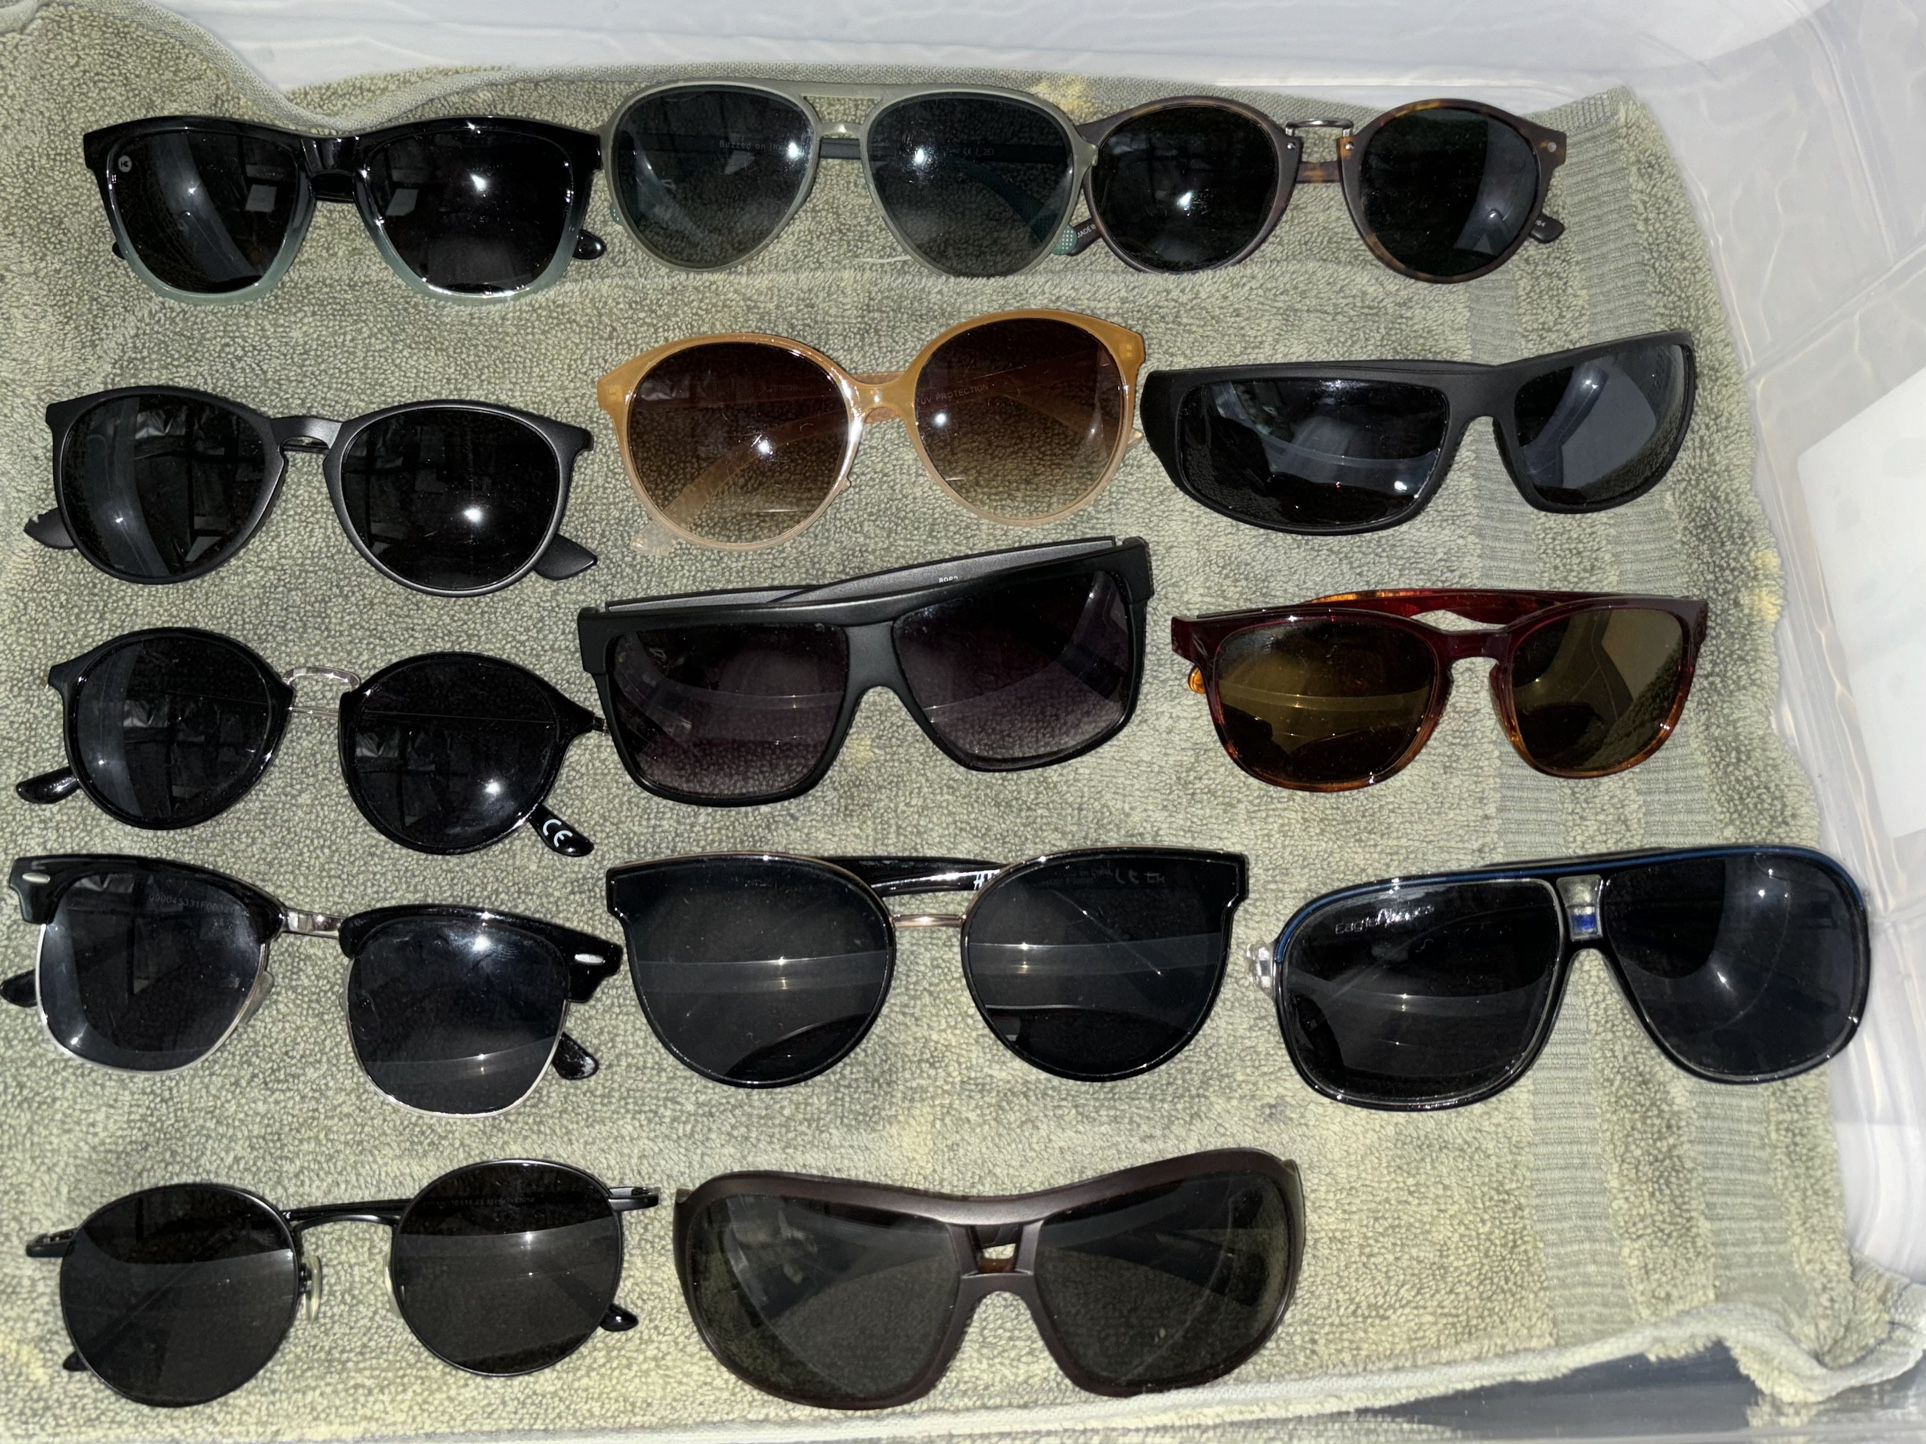 Sunglasses-miscellaneous Styles And Brands !!